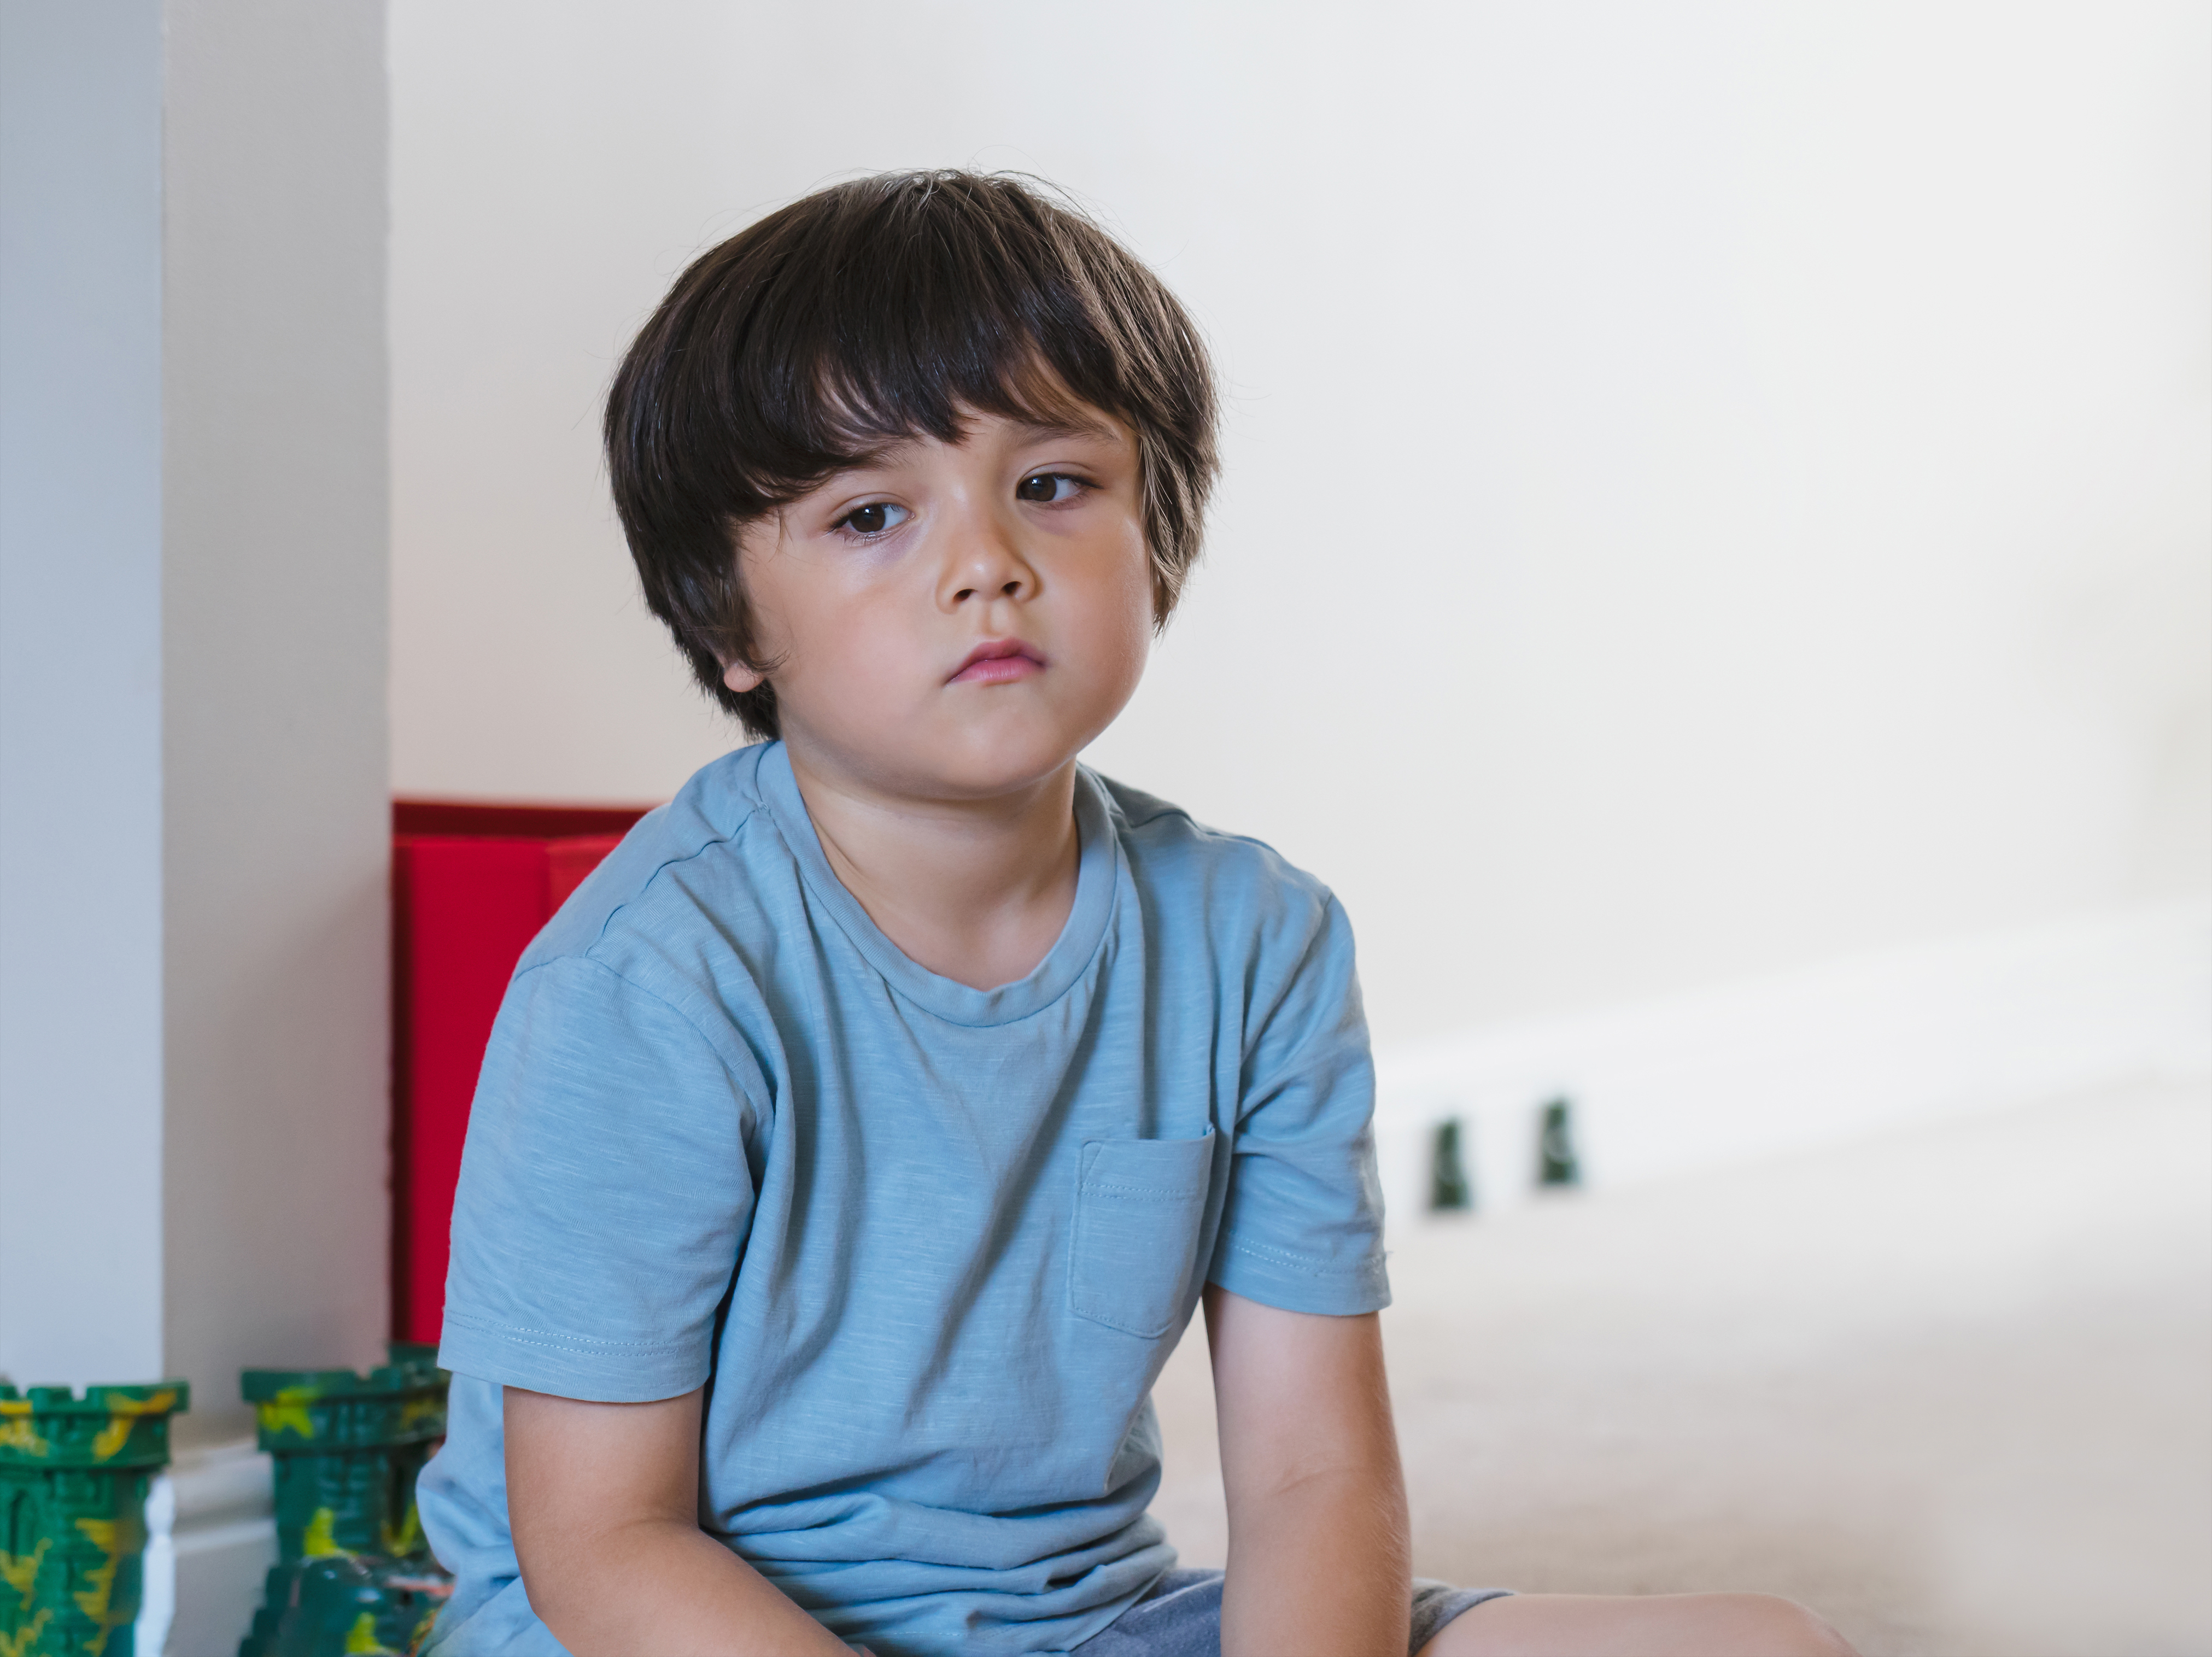 Sad boy is sitting on the chair | Source: Shutterstock.com